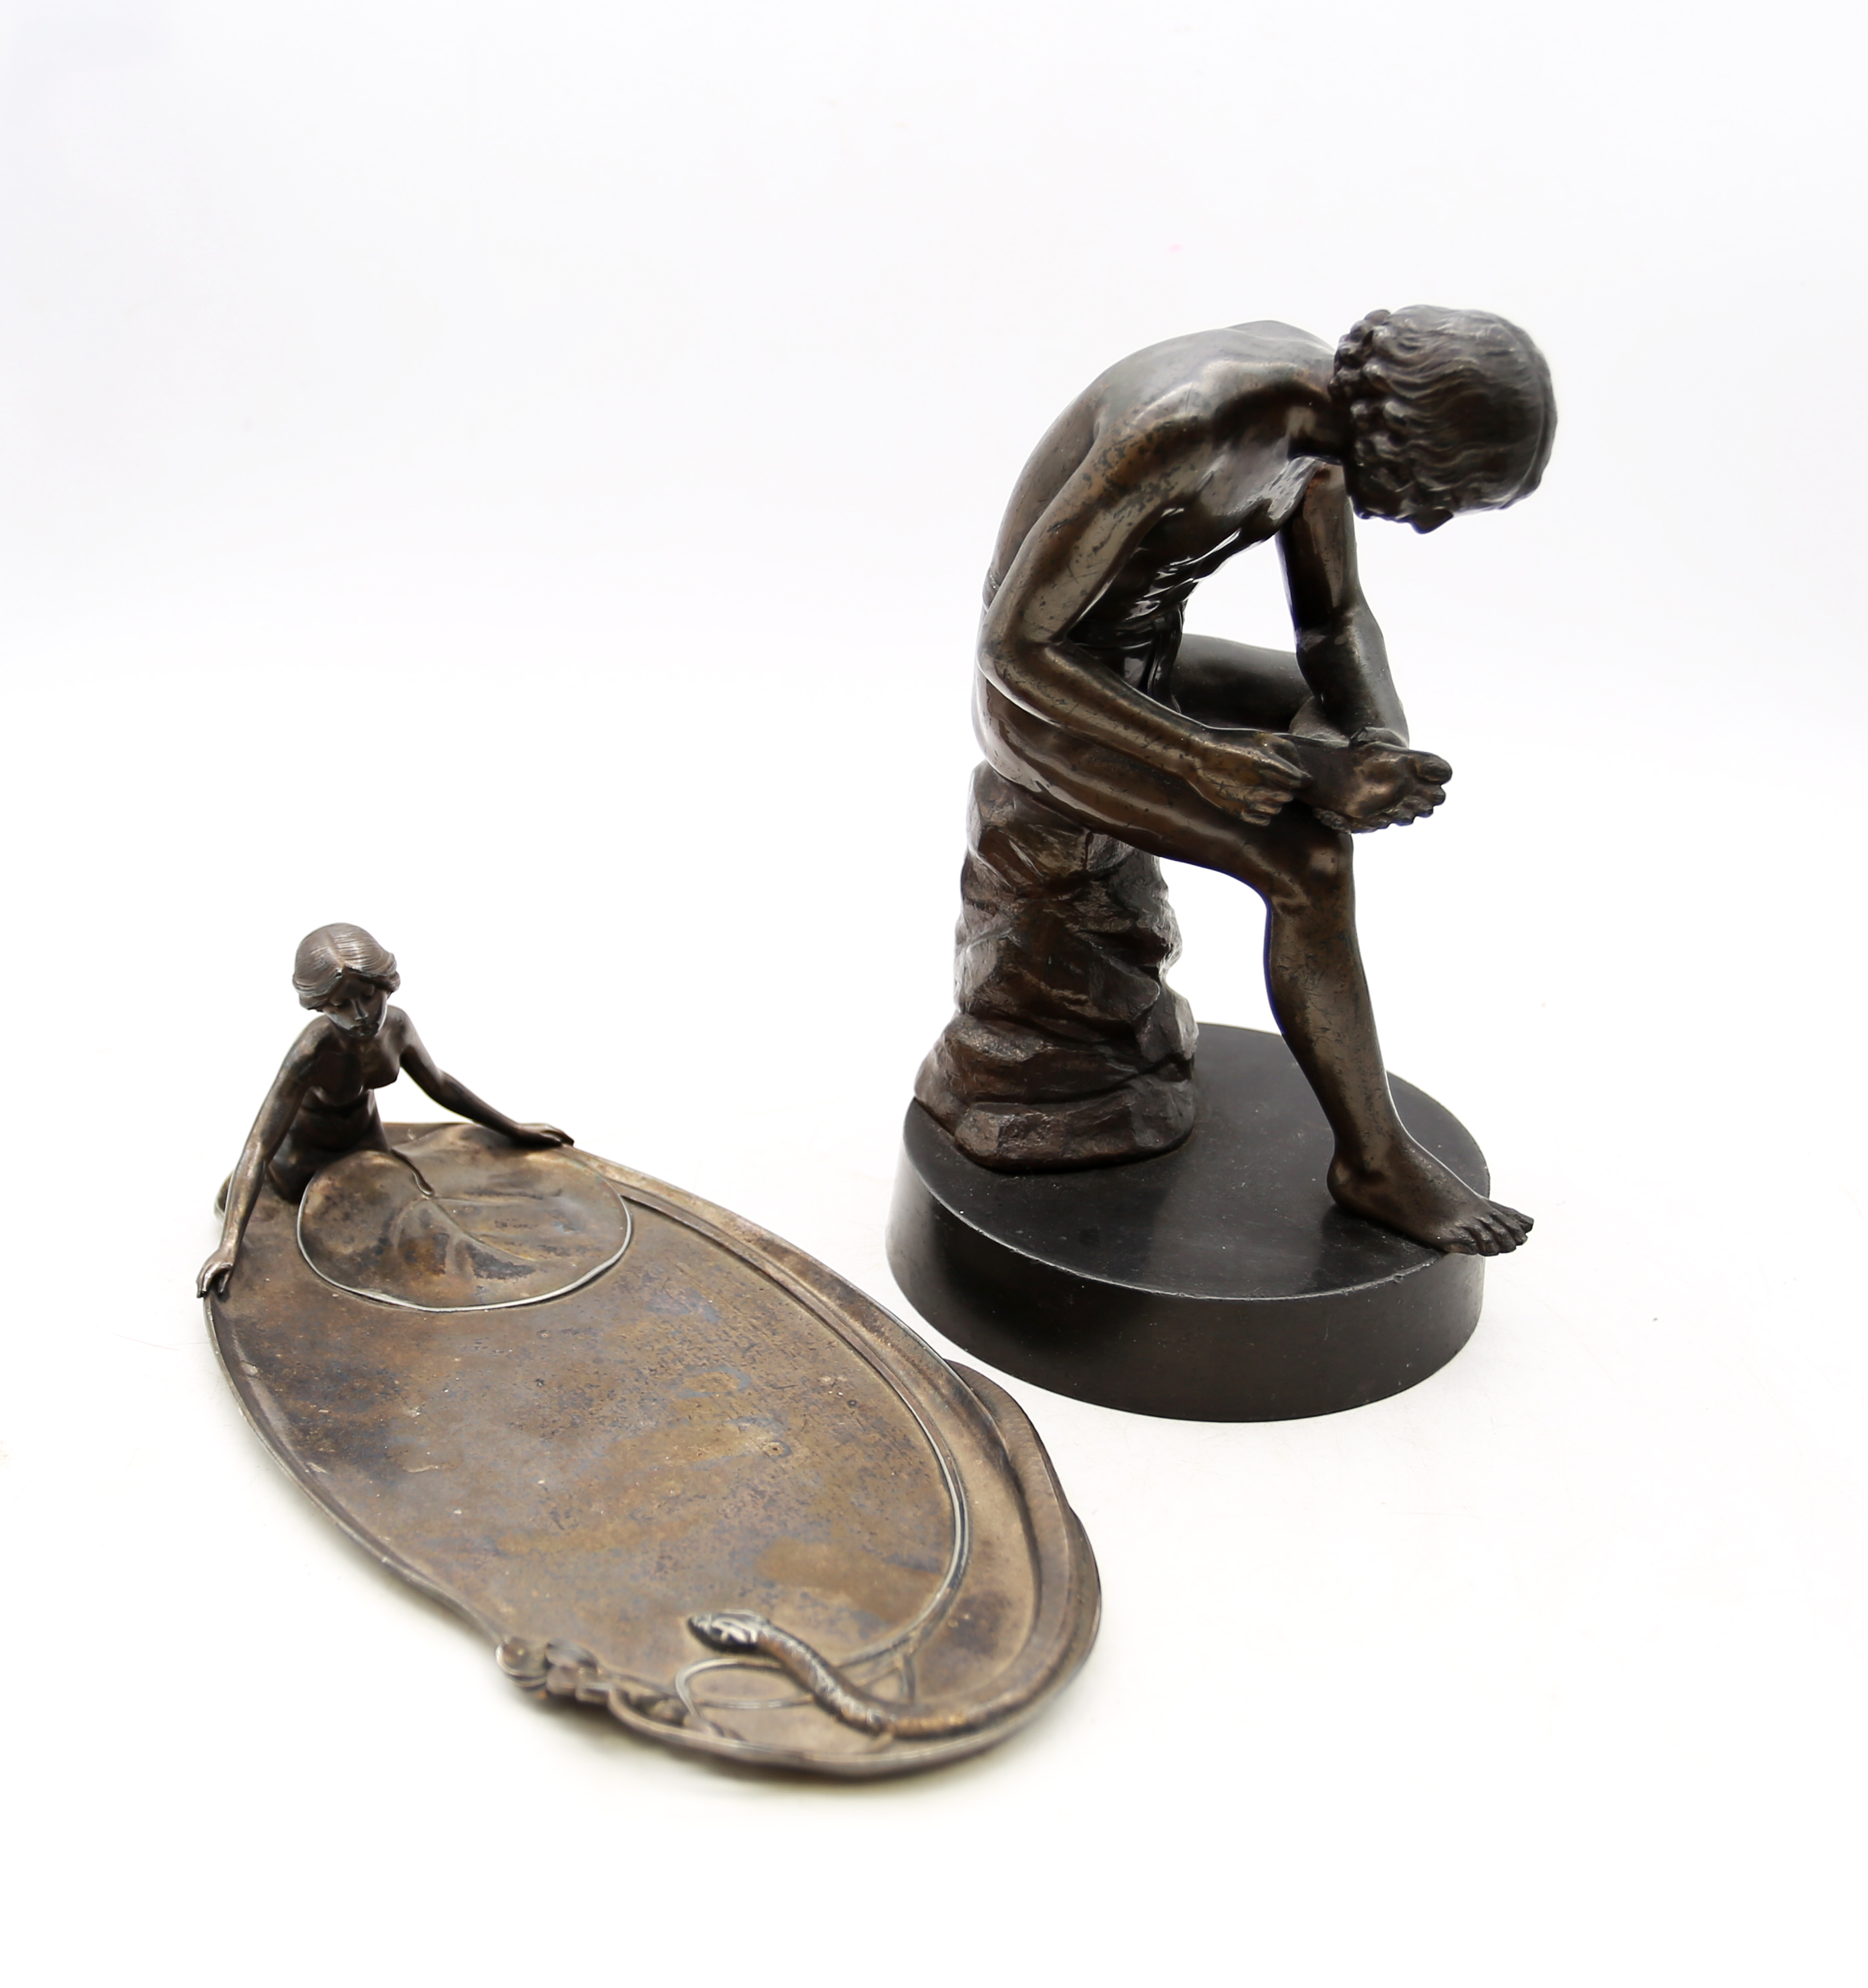 An early 20th Century WMF art nouveau pin dish along with a spelter figure of a classical man.